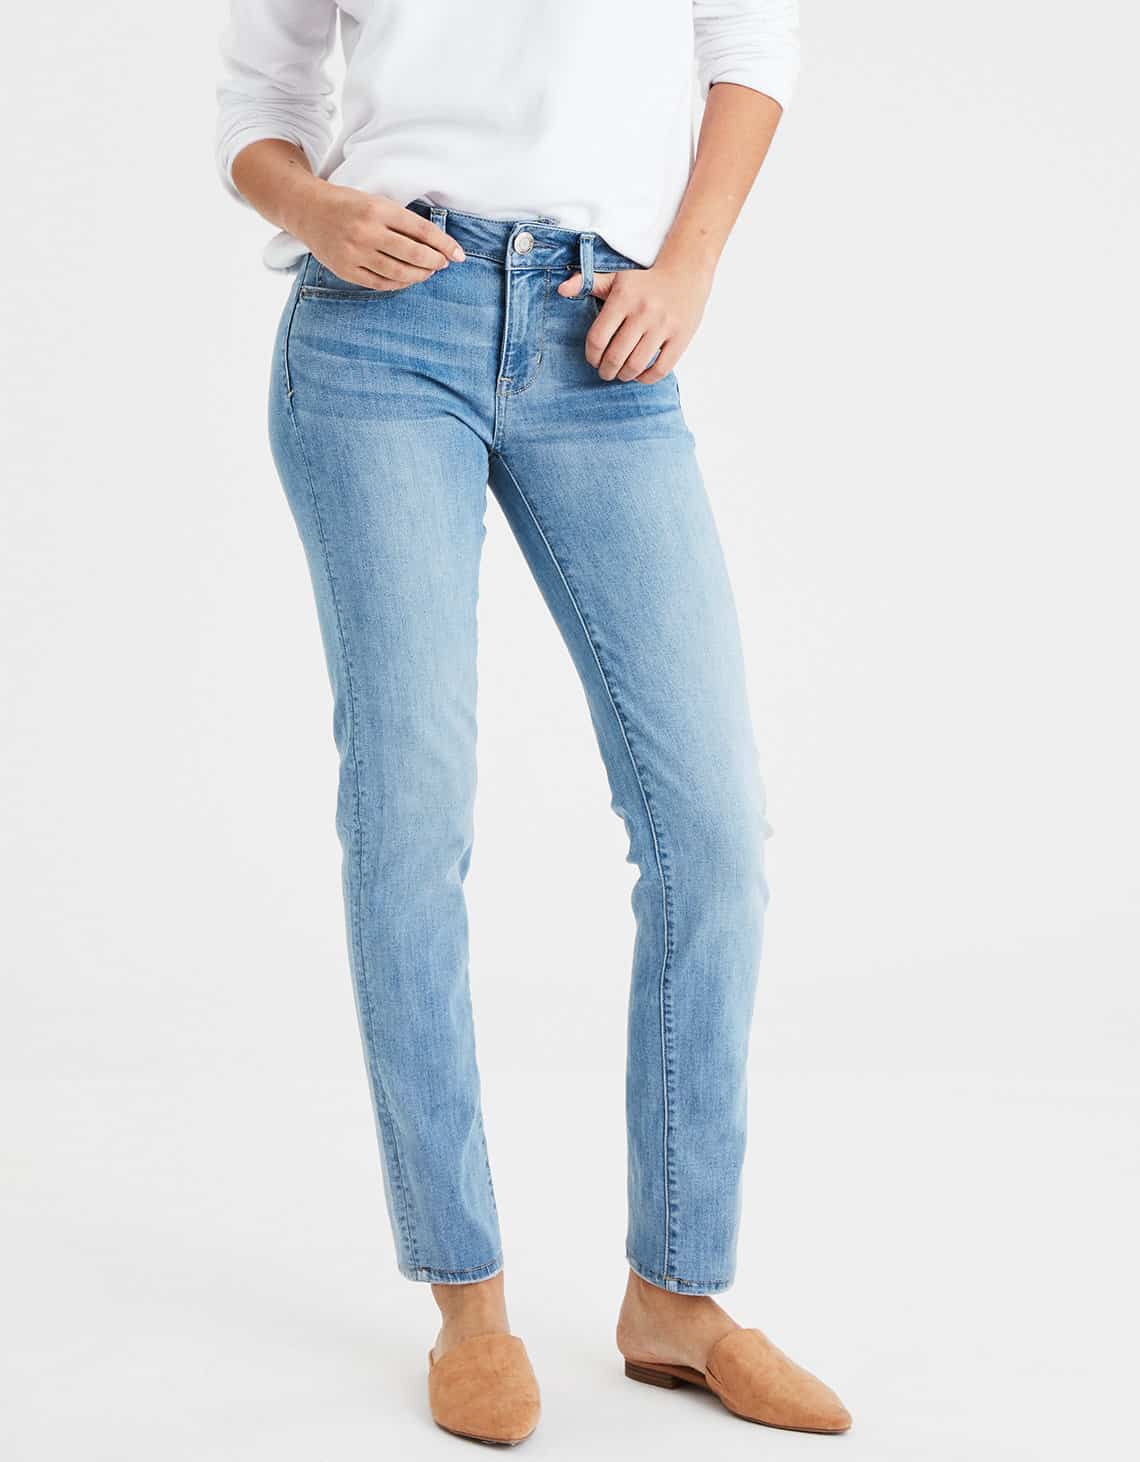 Comfortable Women's Skinny Jeans for all Budgets | Comfort Nerd